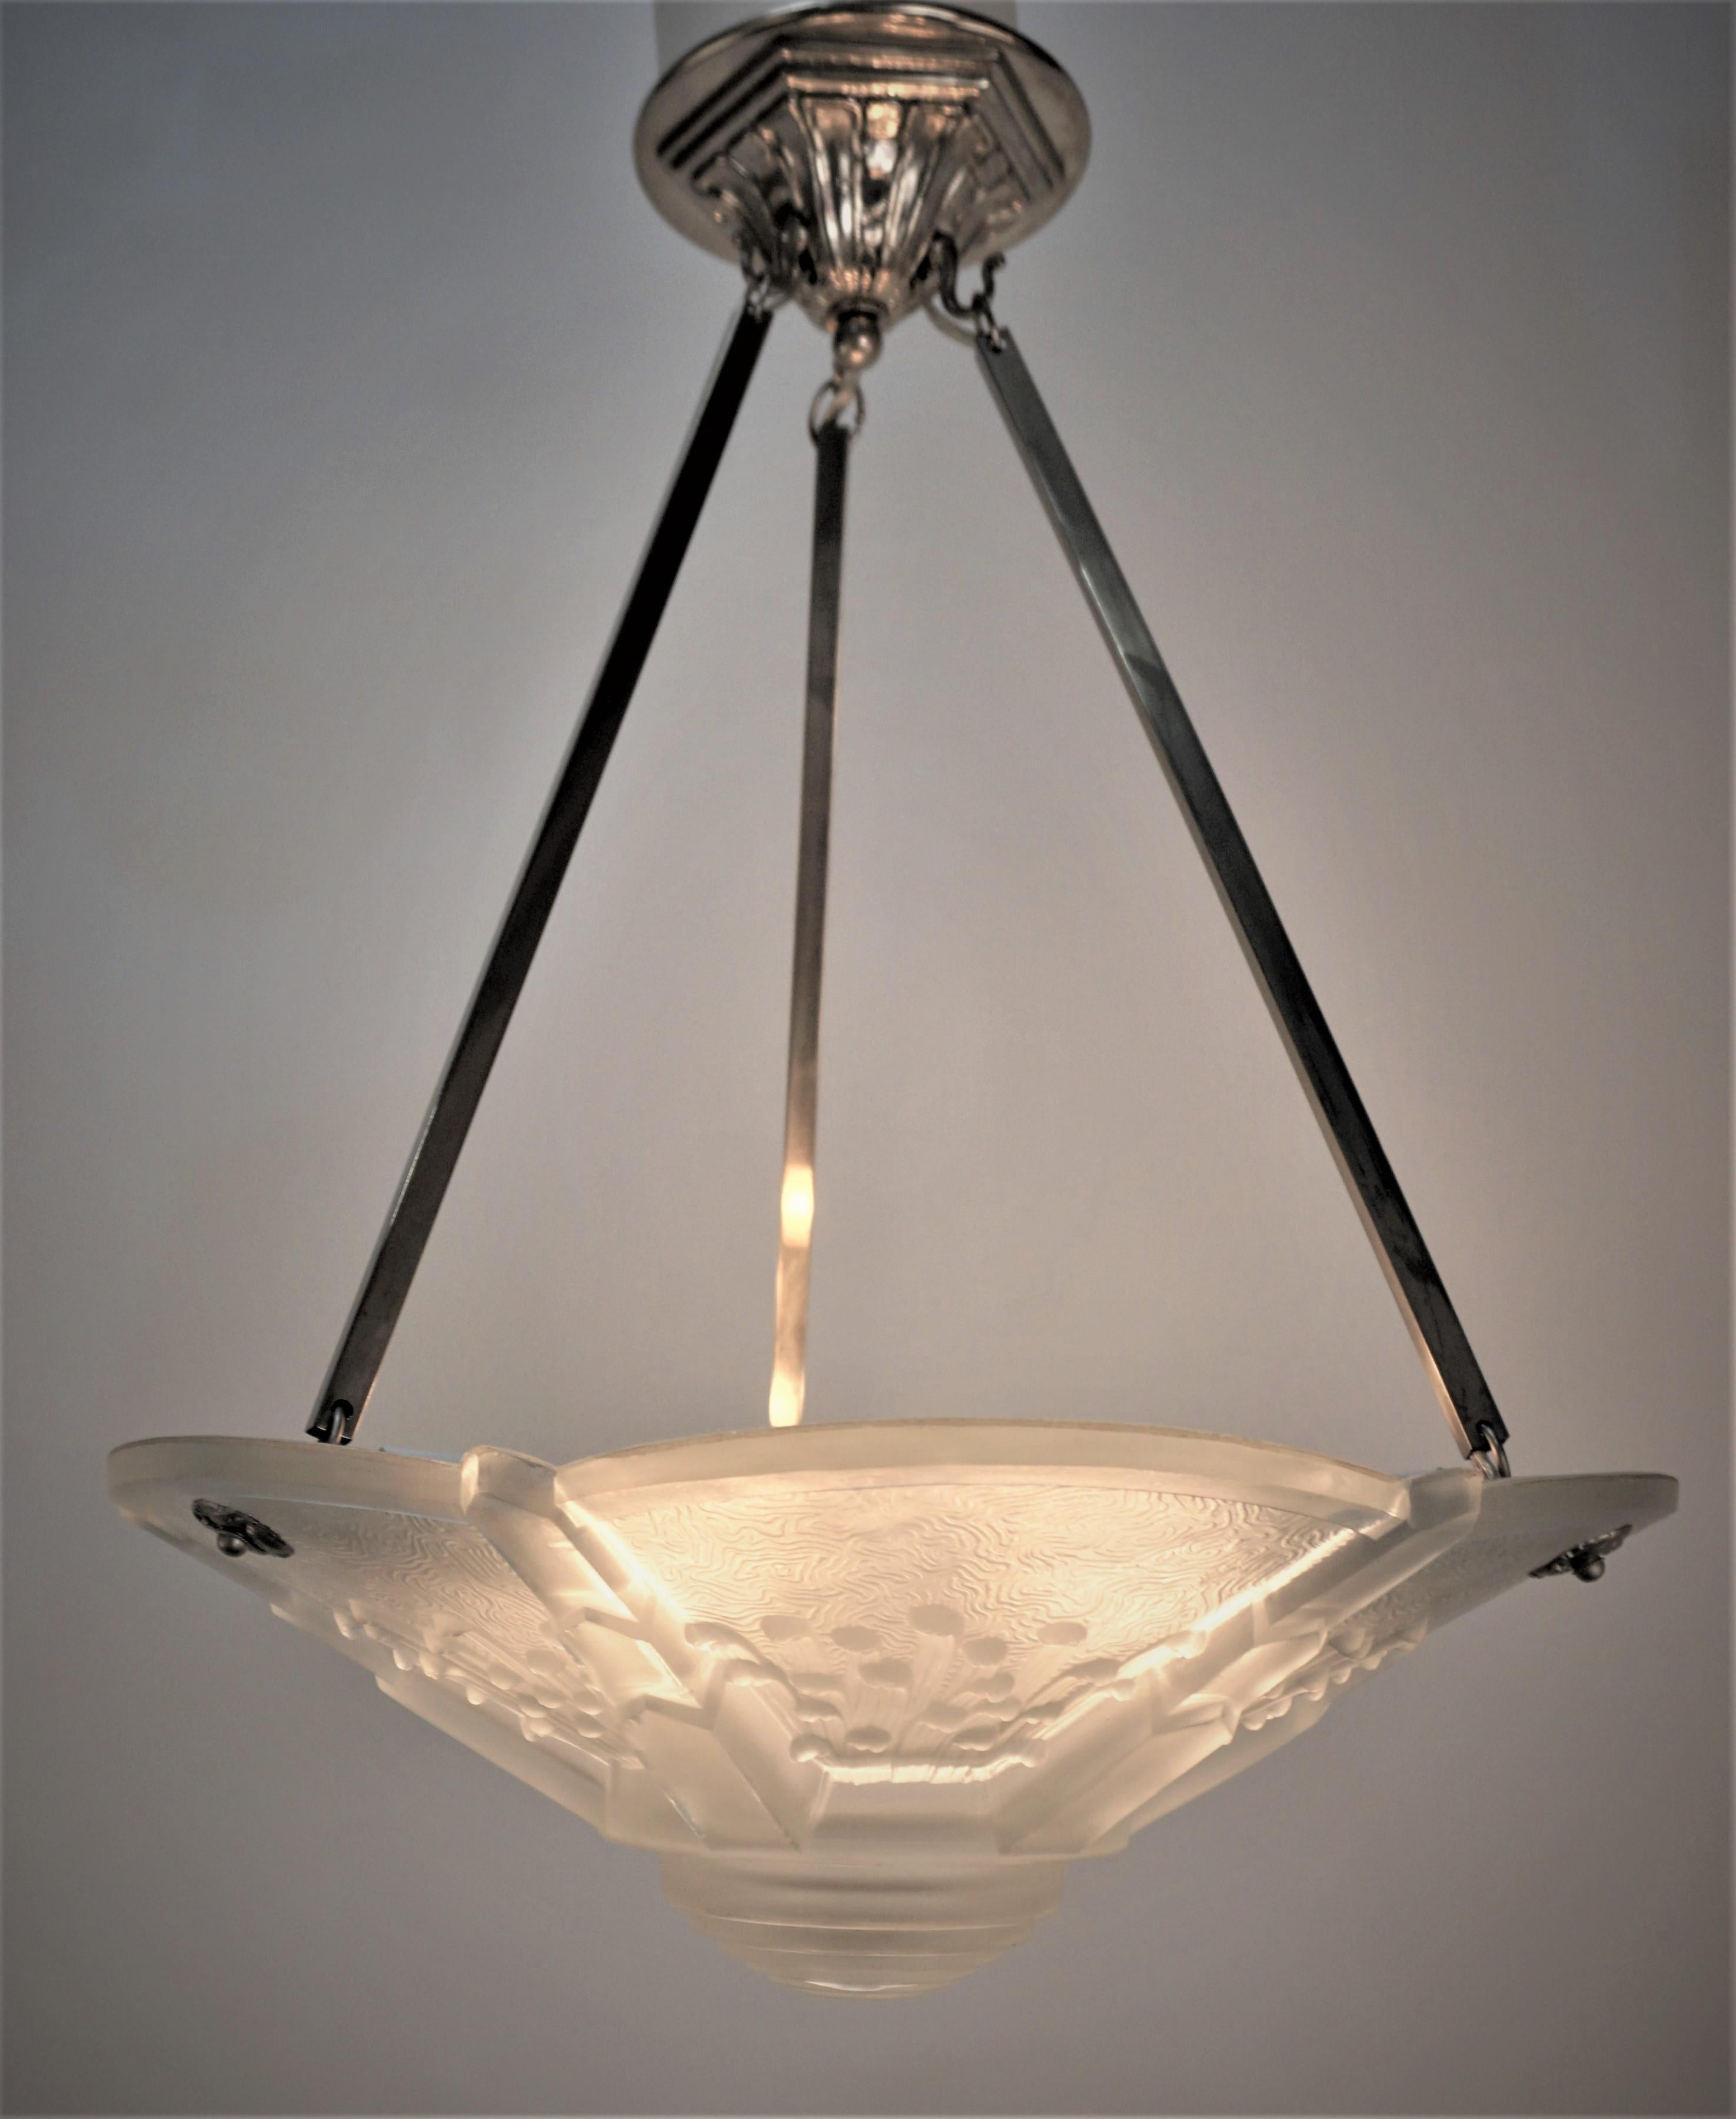 Beautiful design clear frost glass wit high light polish, polished nickel on bronze hardware art deco chandelier by Muller Freres.
Professionally rewired with six lights, 60watts each.